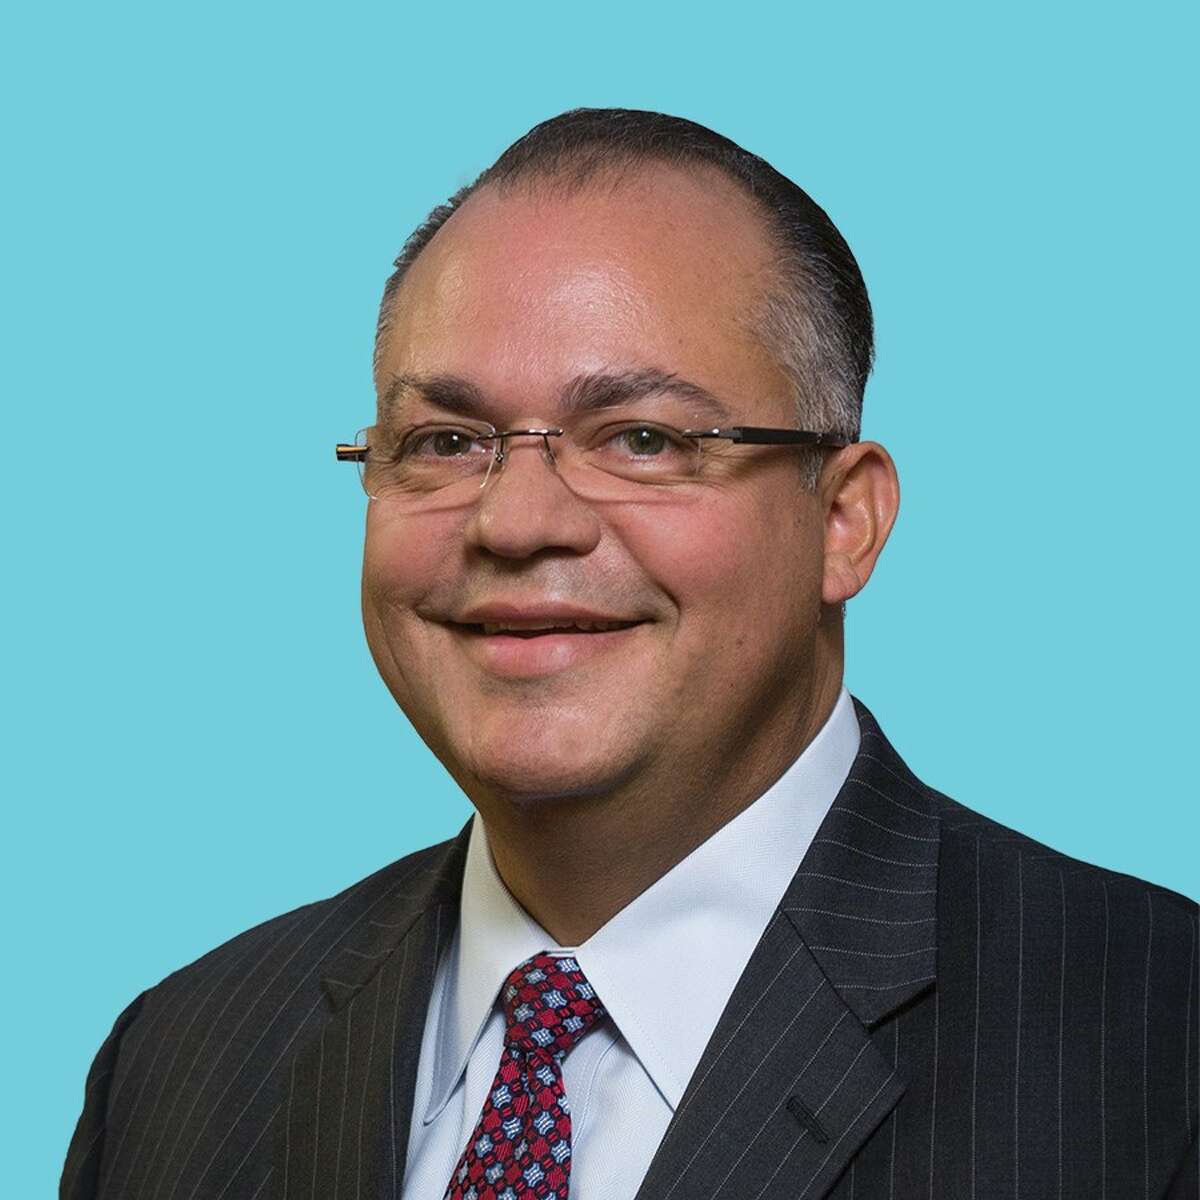 Arturo Sanchez will seek his third term as a Clear Creek ISD trustee in the May 6 election.